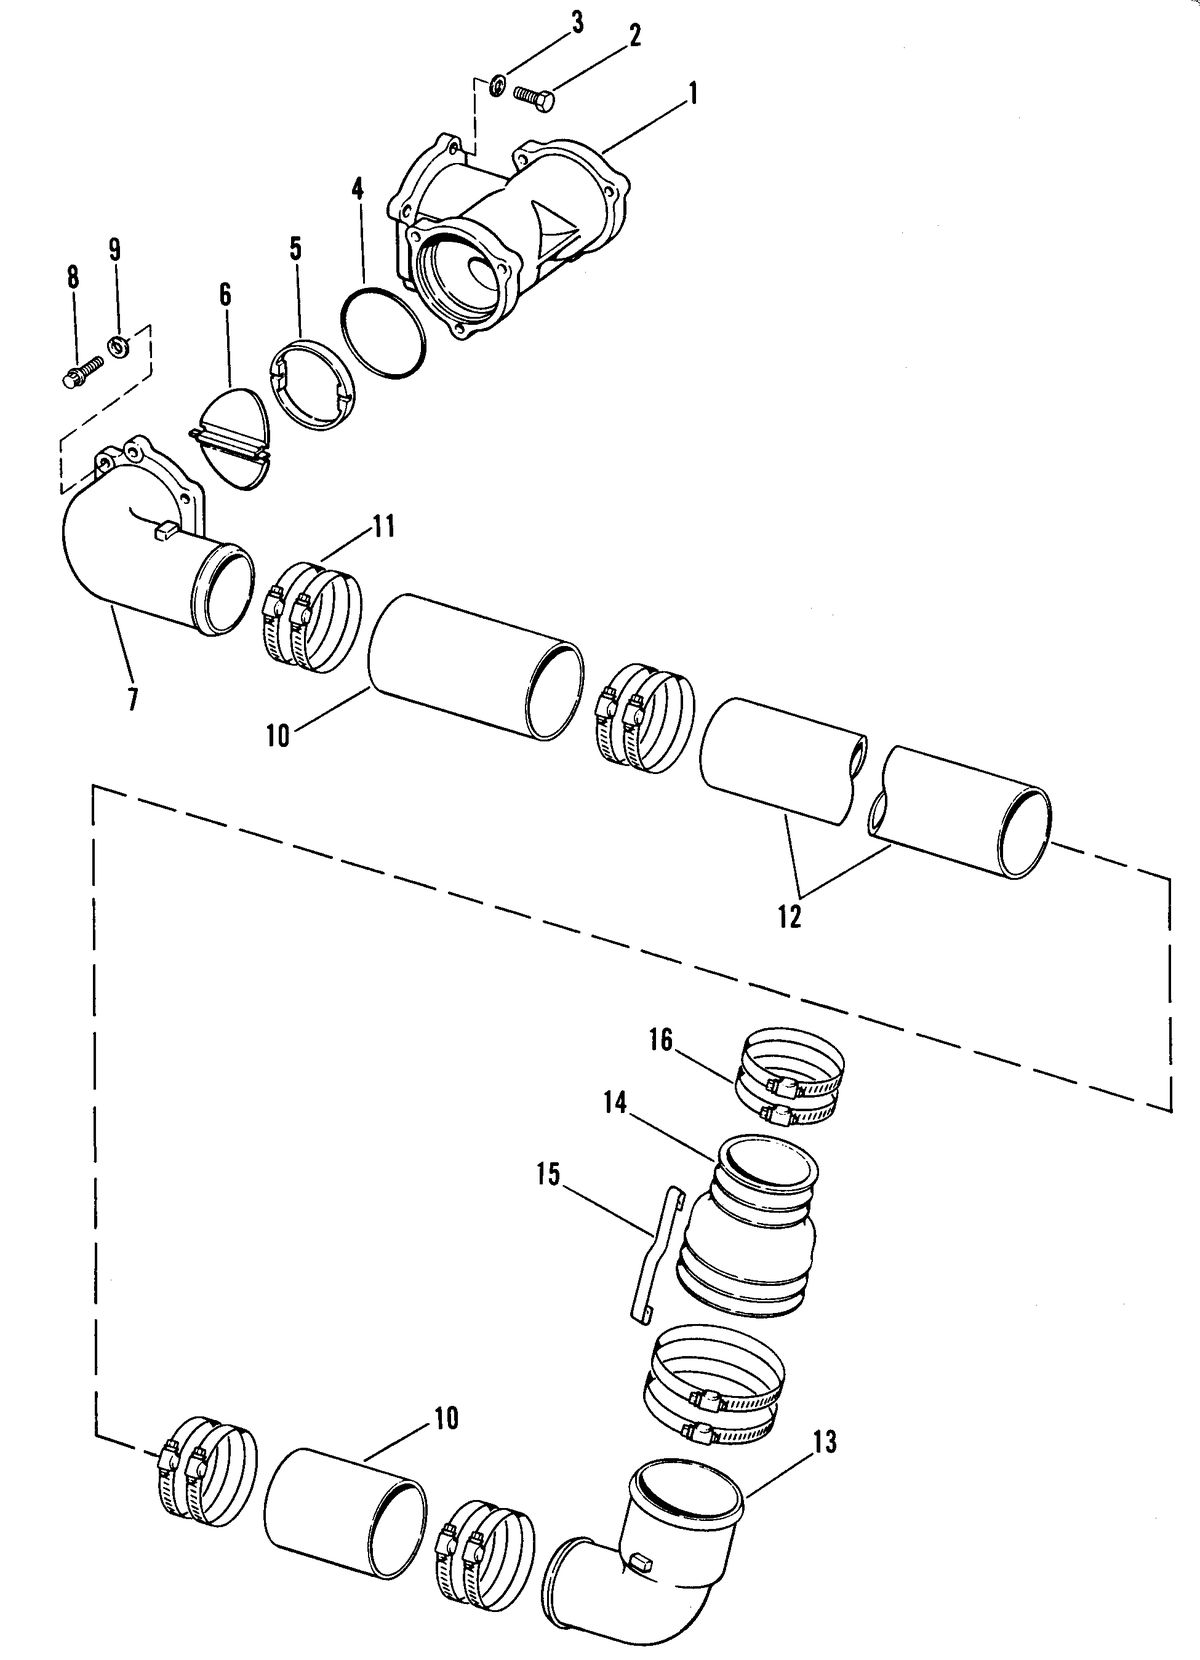 MERCRUISER 898 (STERN DRIVE) 198 (INBOARD) ENGINE DRIVE SHAFT EXTENSION COMPONENTS (M0059-G8)